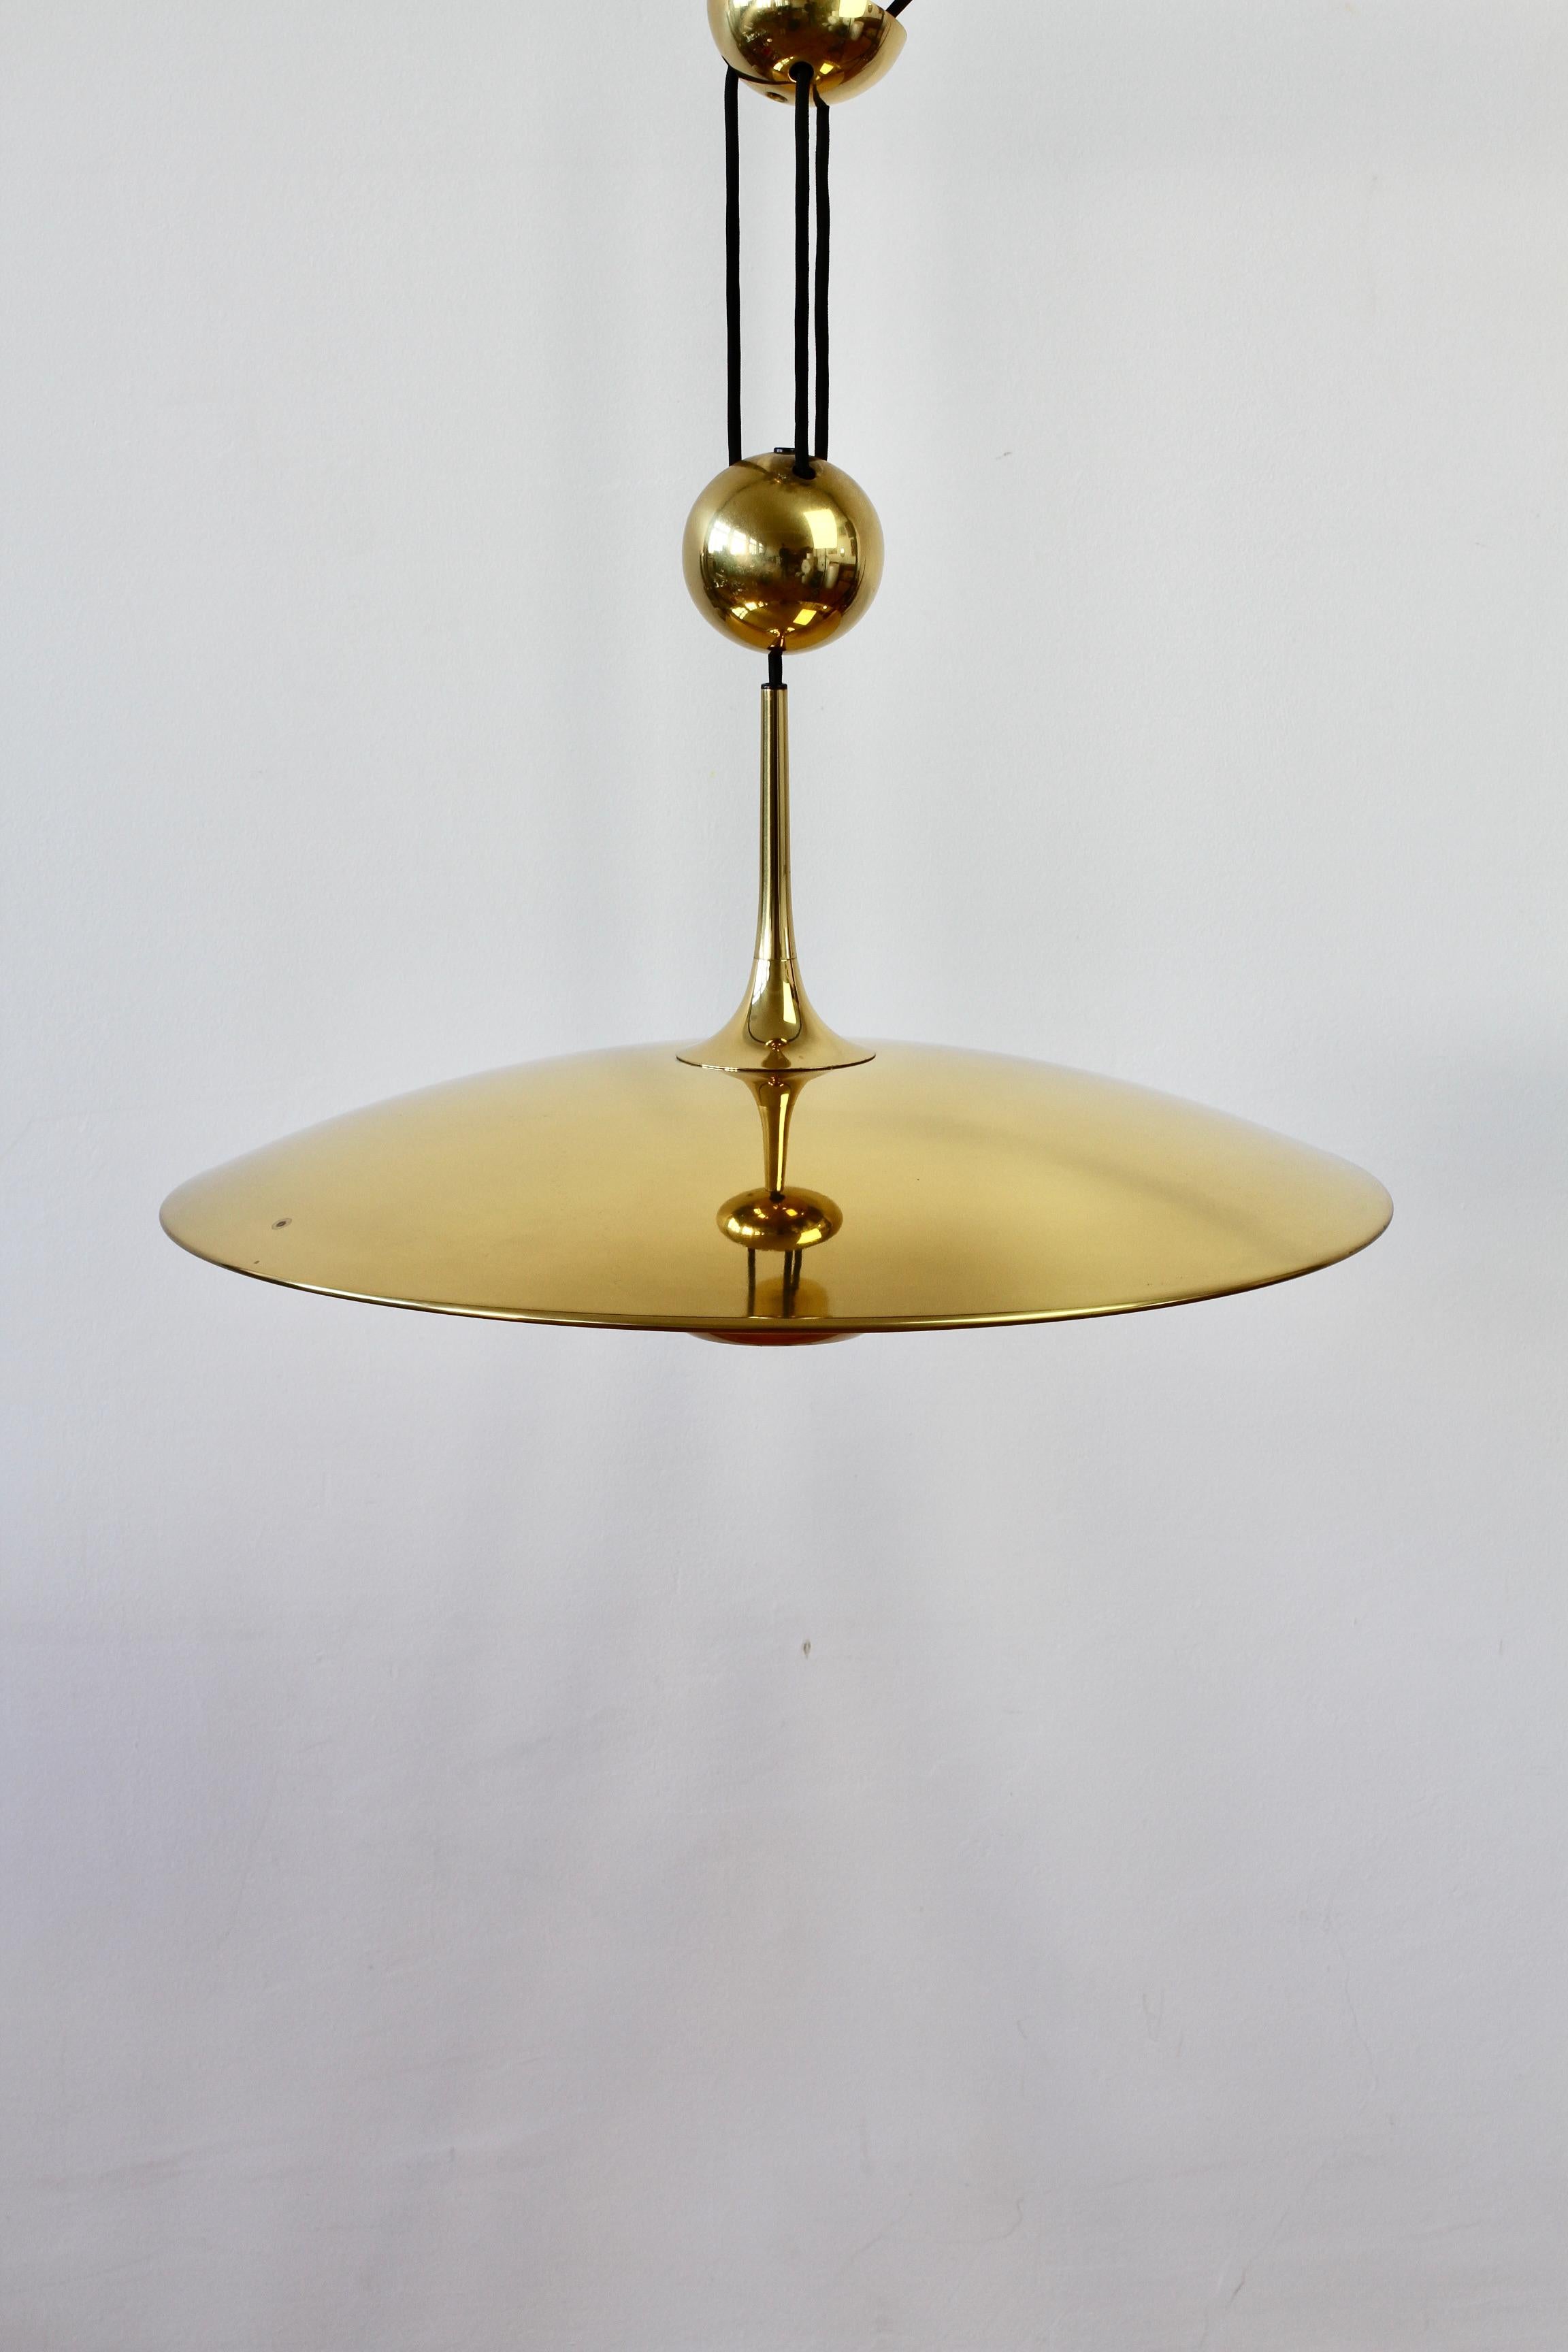 Stunning and elegant Mid-Century Modern vintage German made large polished brass adjustable counterweight hanging pendant light or lamp model 'ONOS 55' designed by Florian Schulz circa early 1970s. Featuring polished brass (now with minimal age